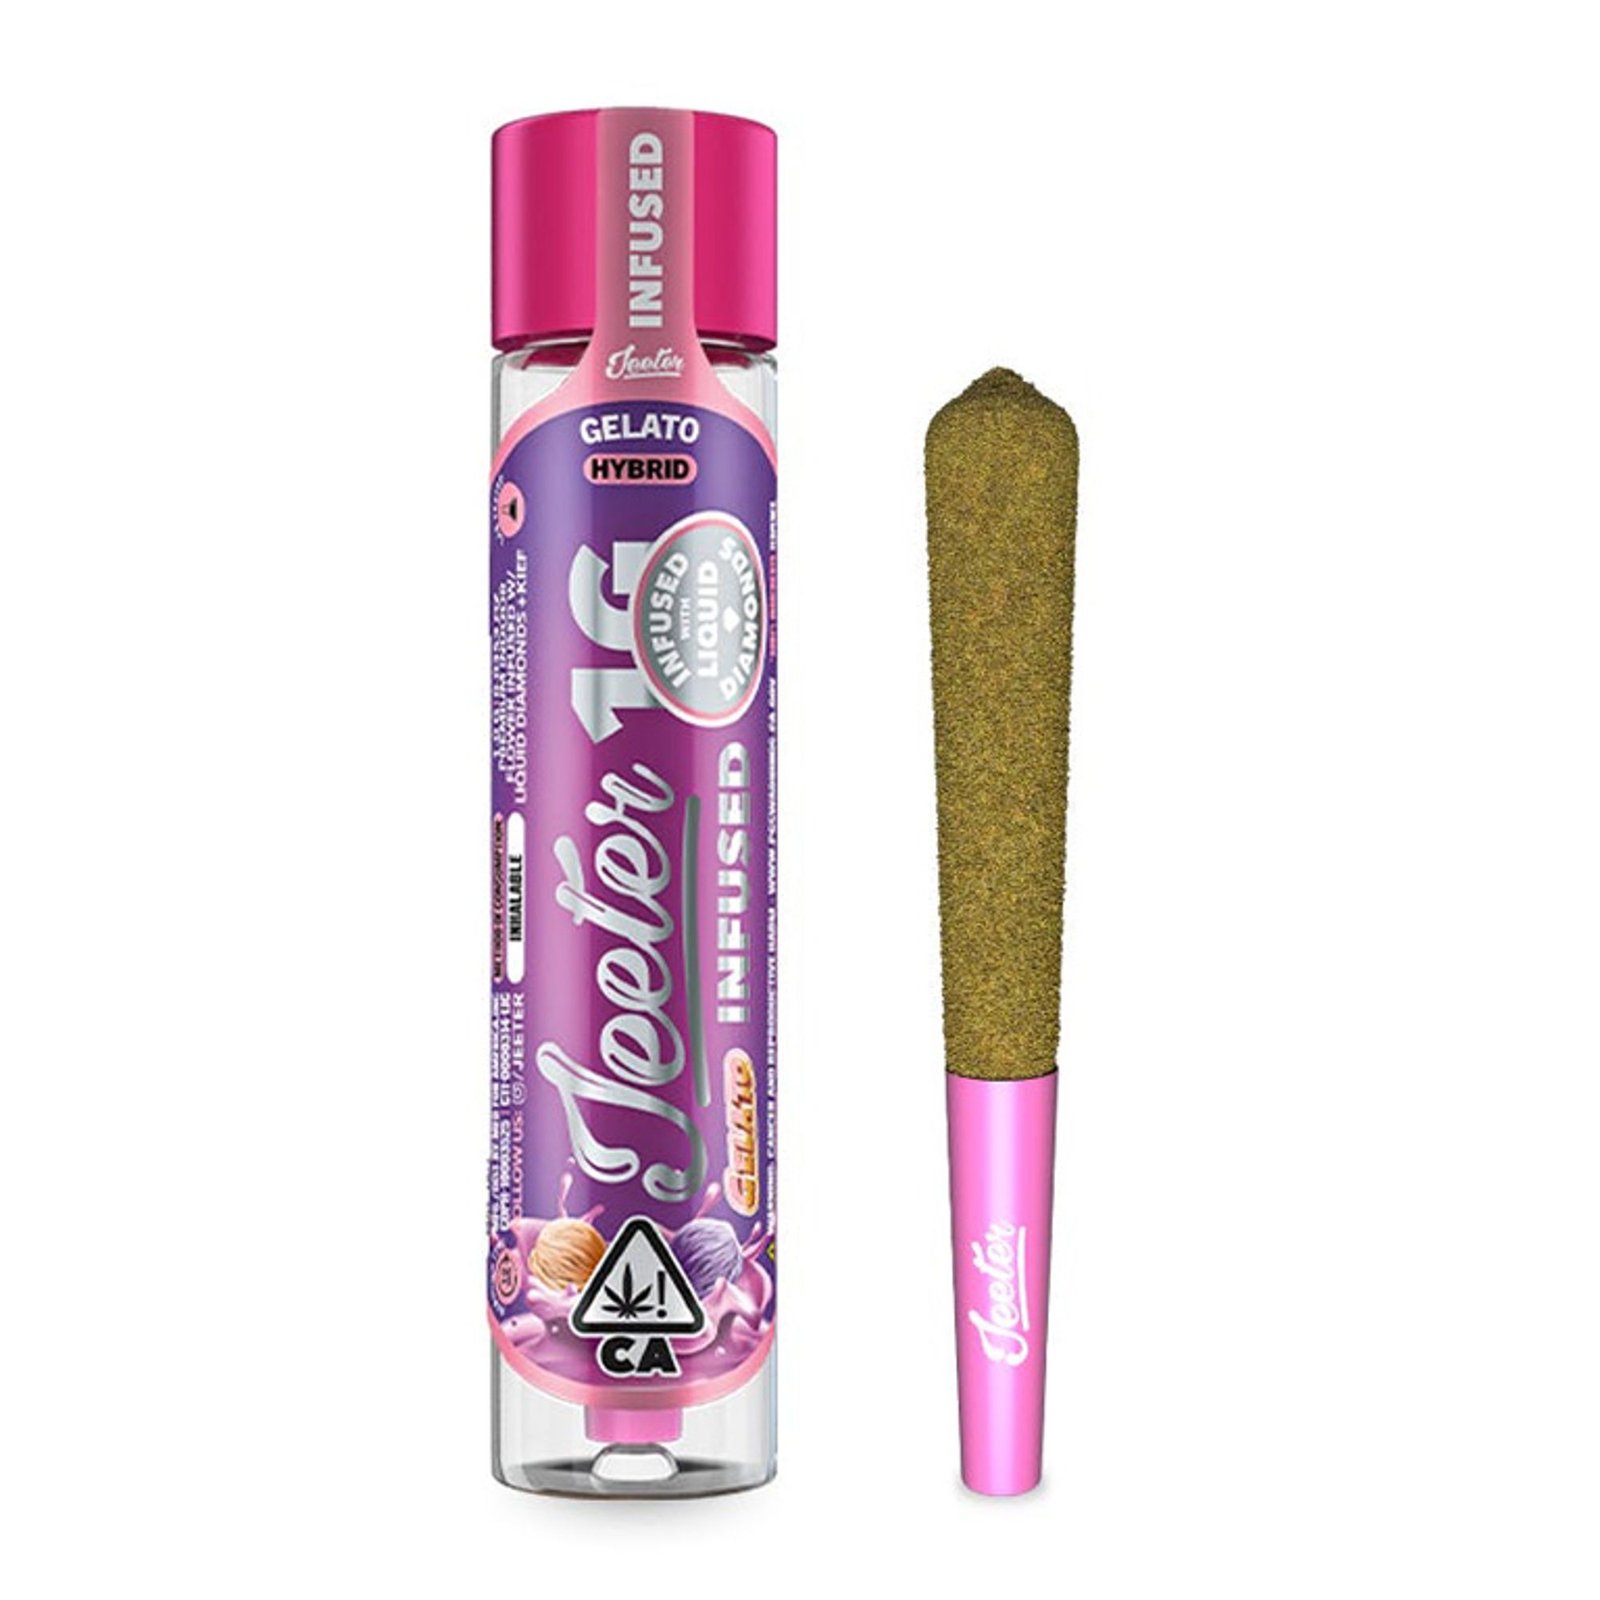 Buy Pre-rolled Joints Switzerland Buy Pre-rolls Online Switzerland. It delivers an uplifting and energetic high, perfect for rejuvenation after a long day.